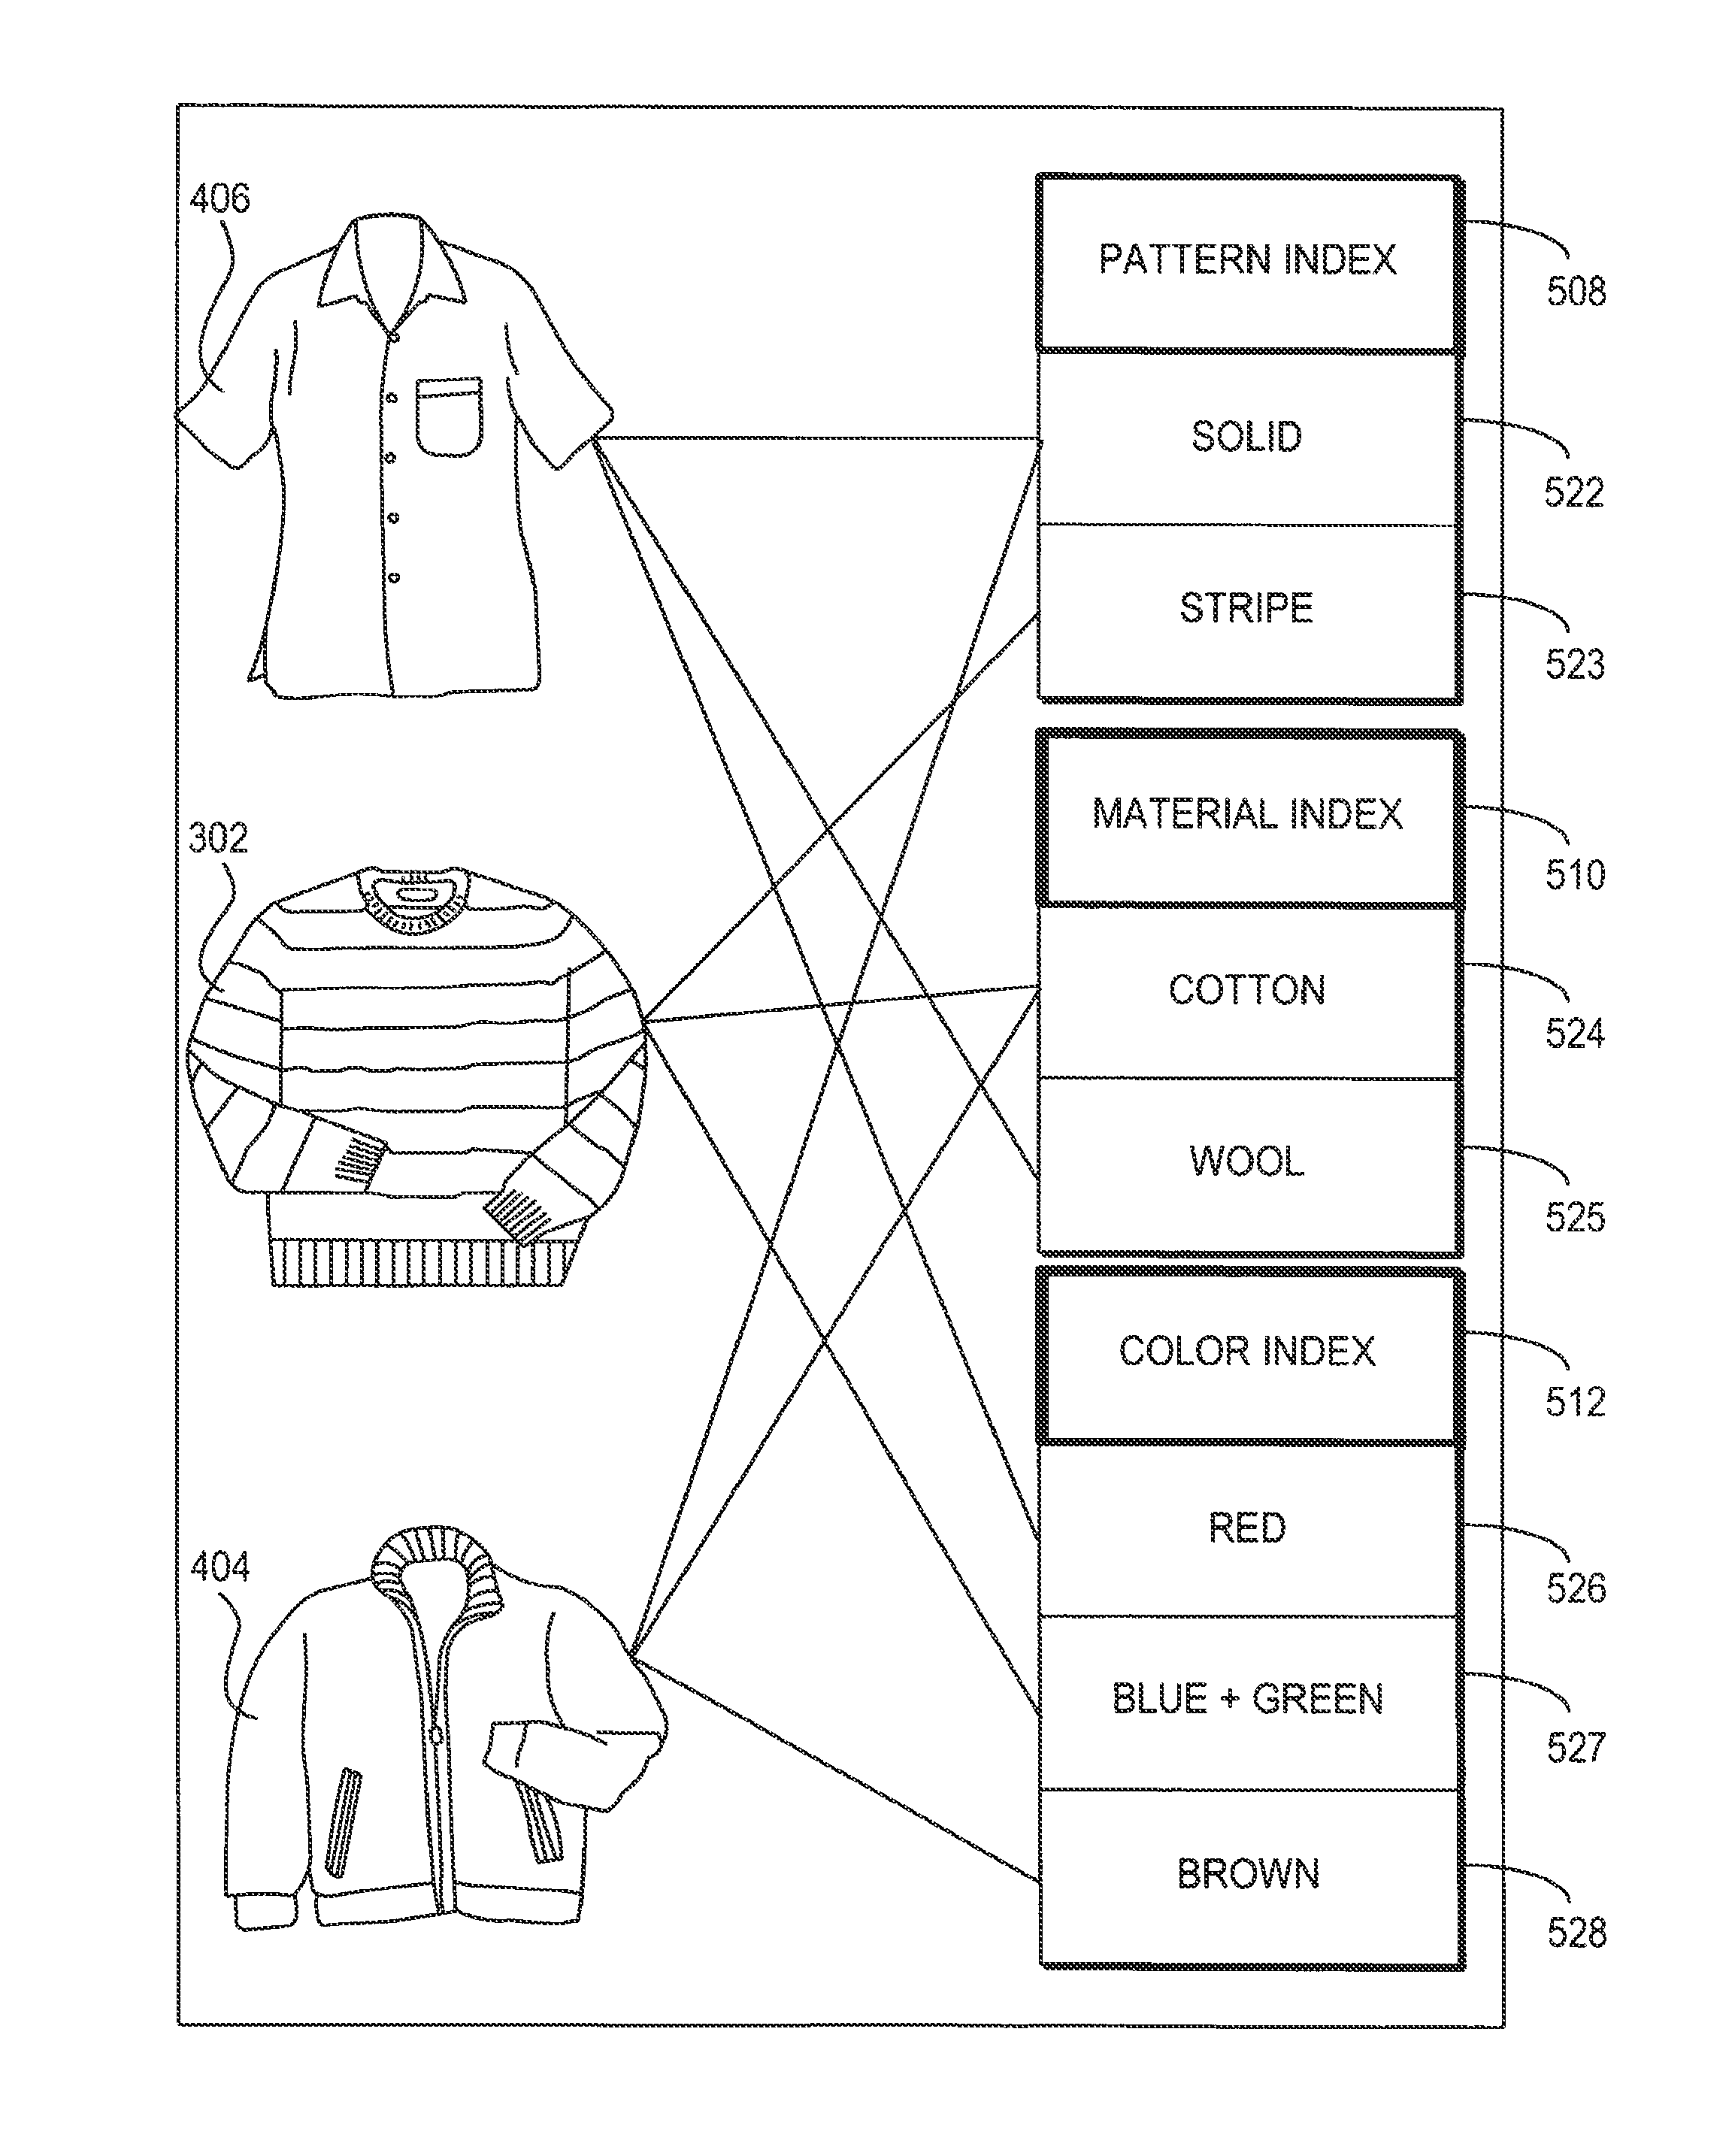 Systems and methods for visual presentation and navigation of content using data-based image analysis